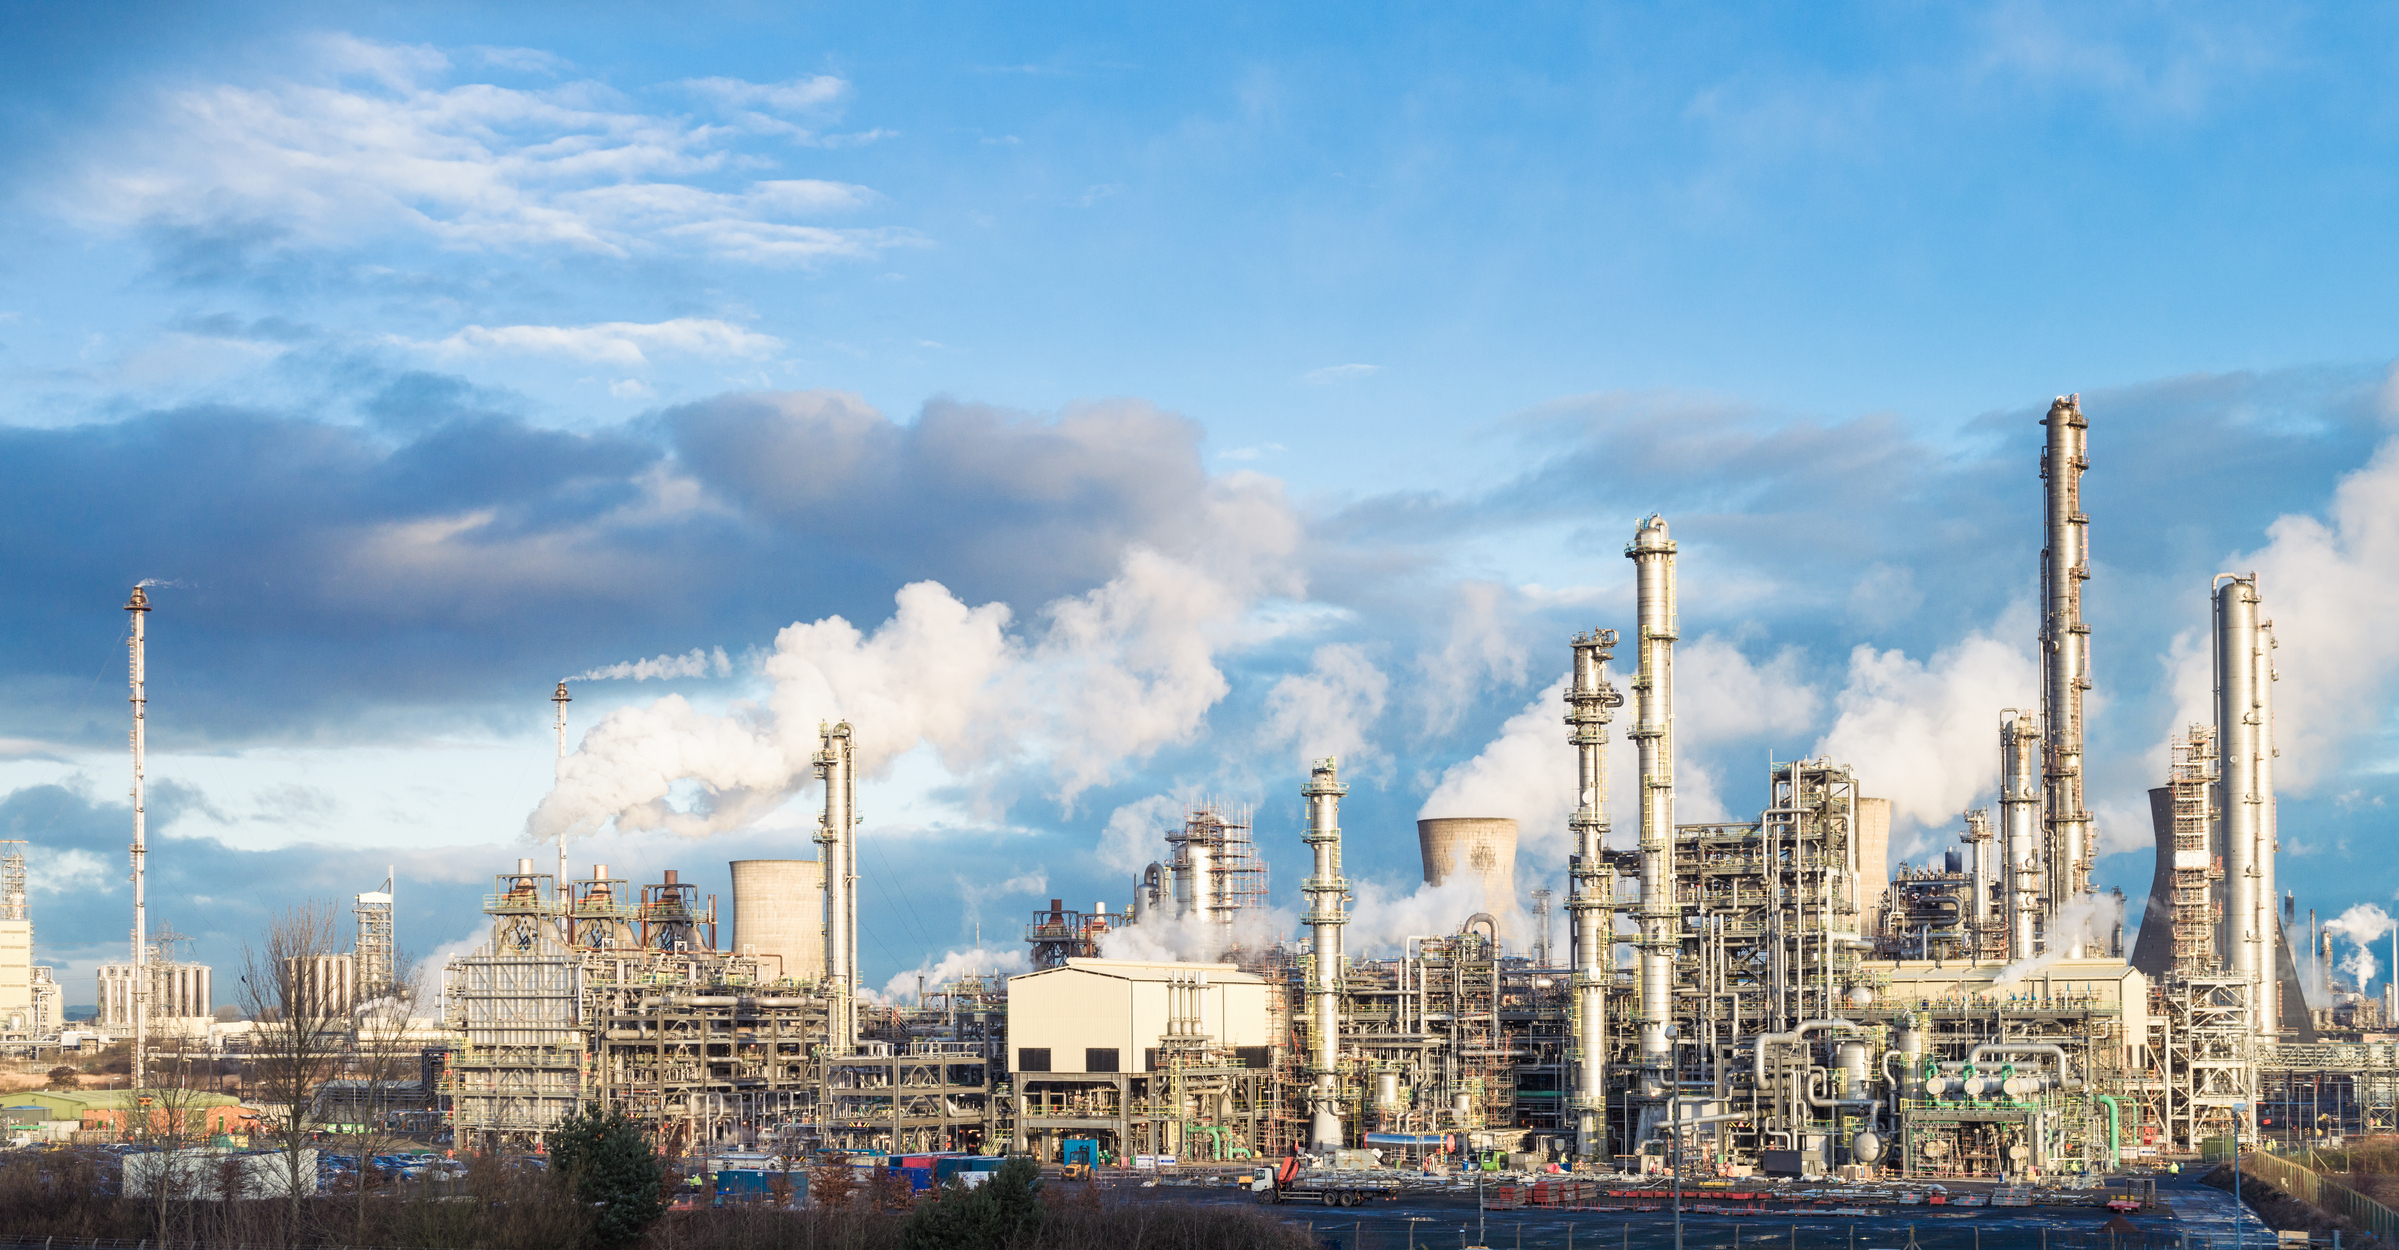 A panoramic image of Grangemouth petrochemical plant in central Scotland.